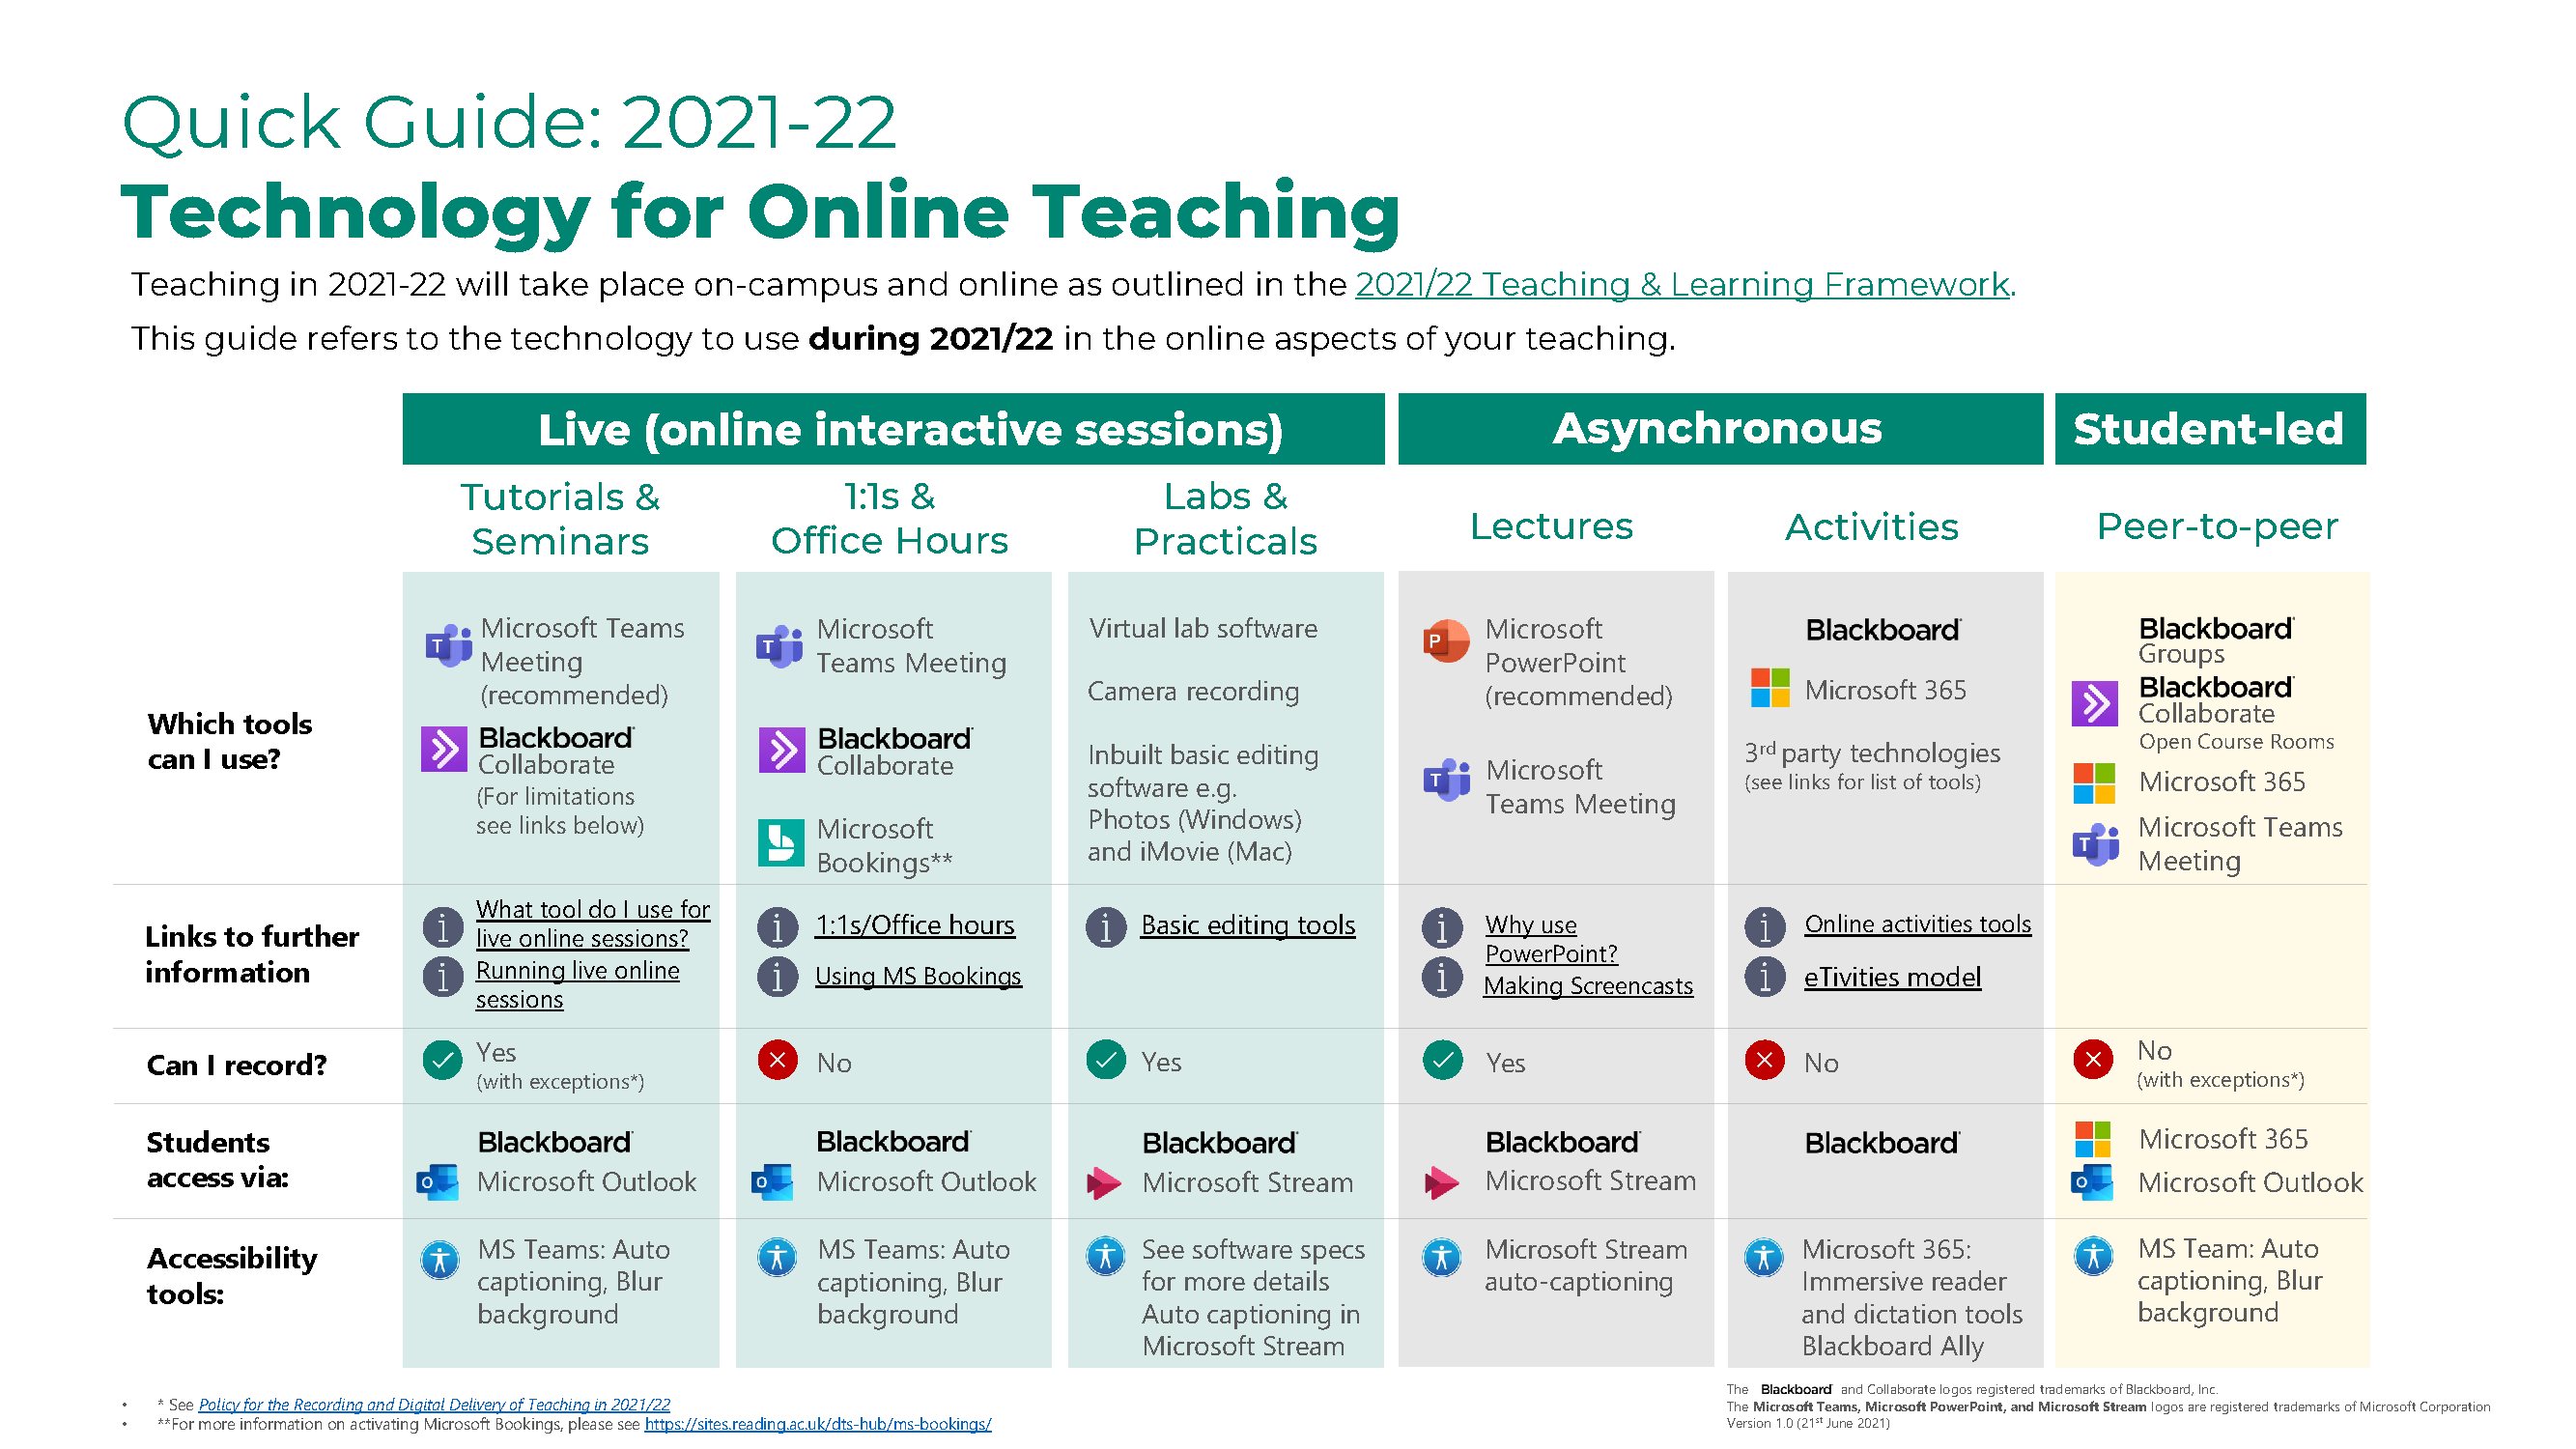 Quick-Guide-2021-22-Technology-for-Online-Teaching-v1.0 Avoid The Top 10 Mistakes Made By Beginning etoilet